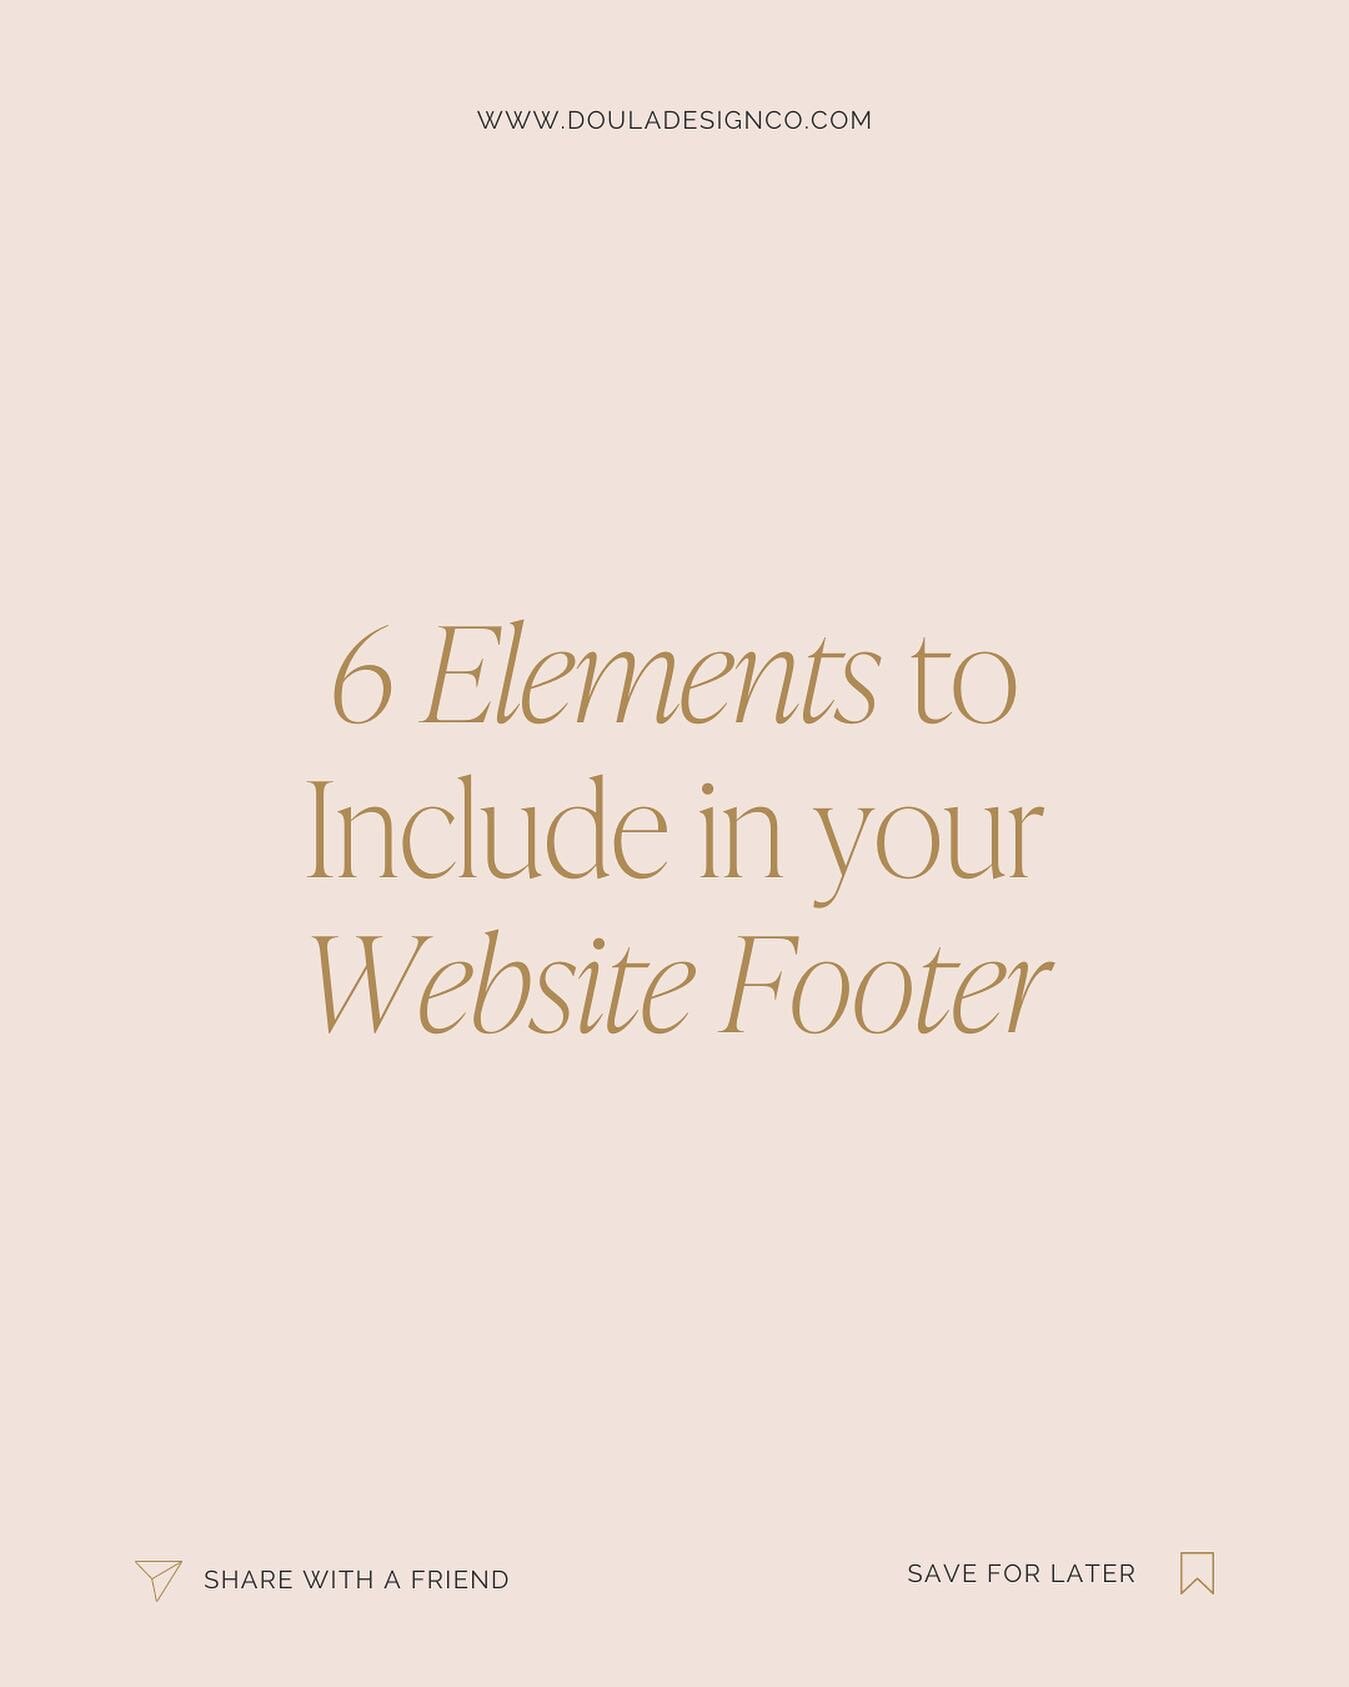 6 Must-Have Elements to include in your Website Footer. ✍️

1️⃣Business Name - Include your business name or logo 👋🏻
2️⃣Business Description - Share a 2-3 sentence elevator pitch about what your business is all about and where you&rsquo;re located.